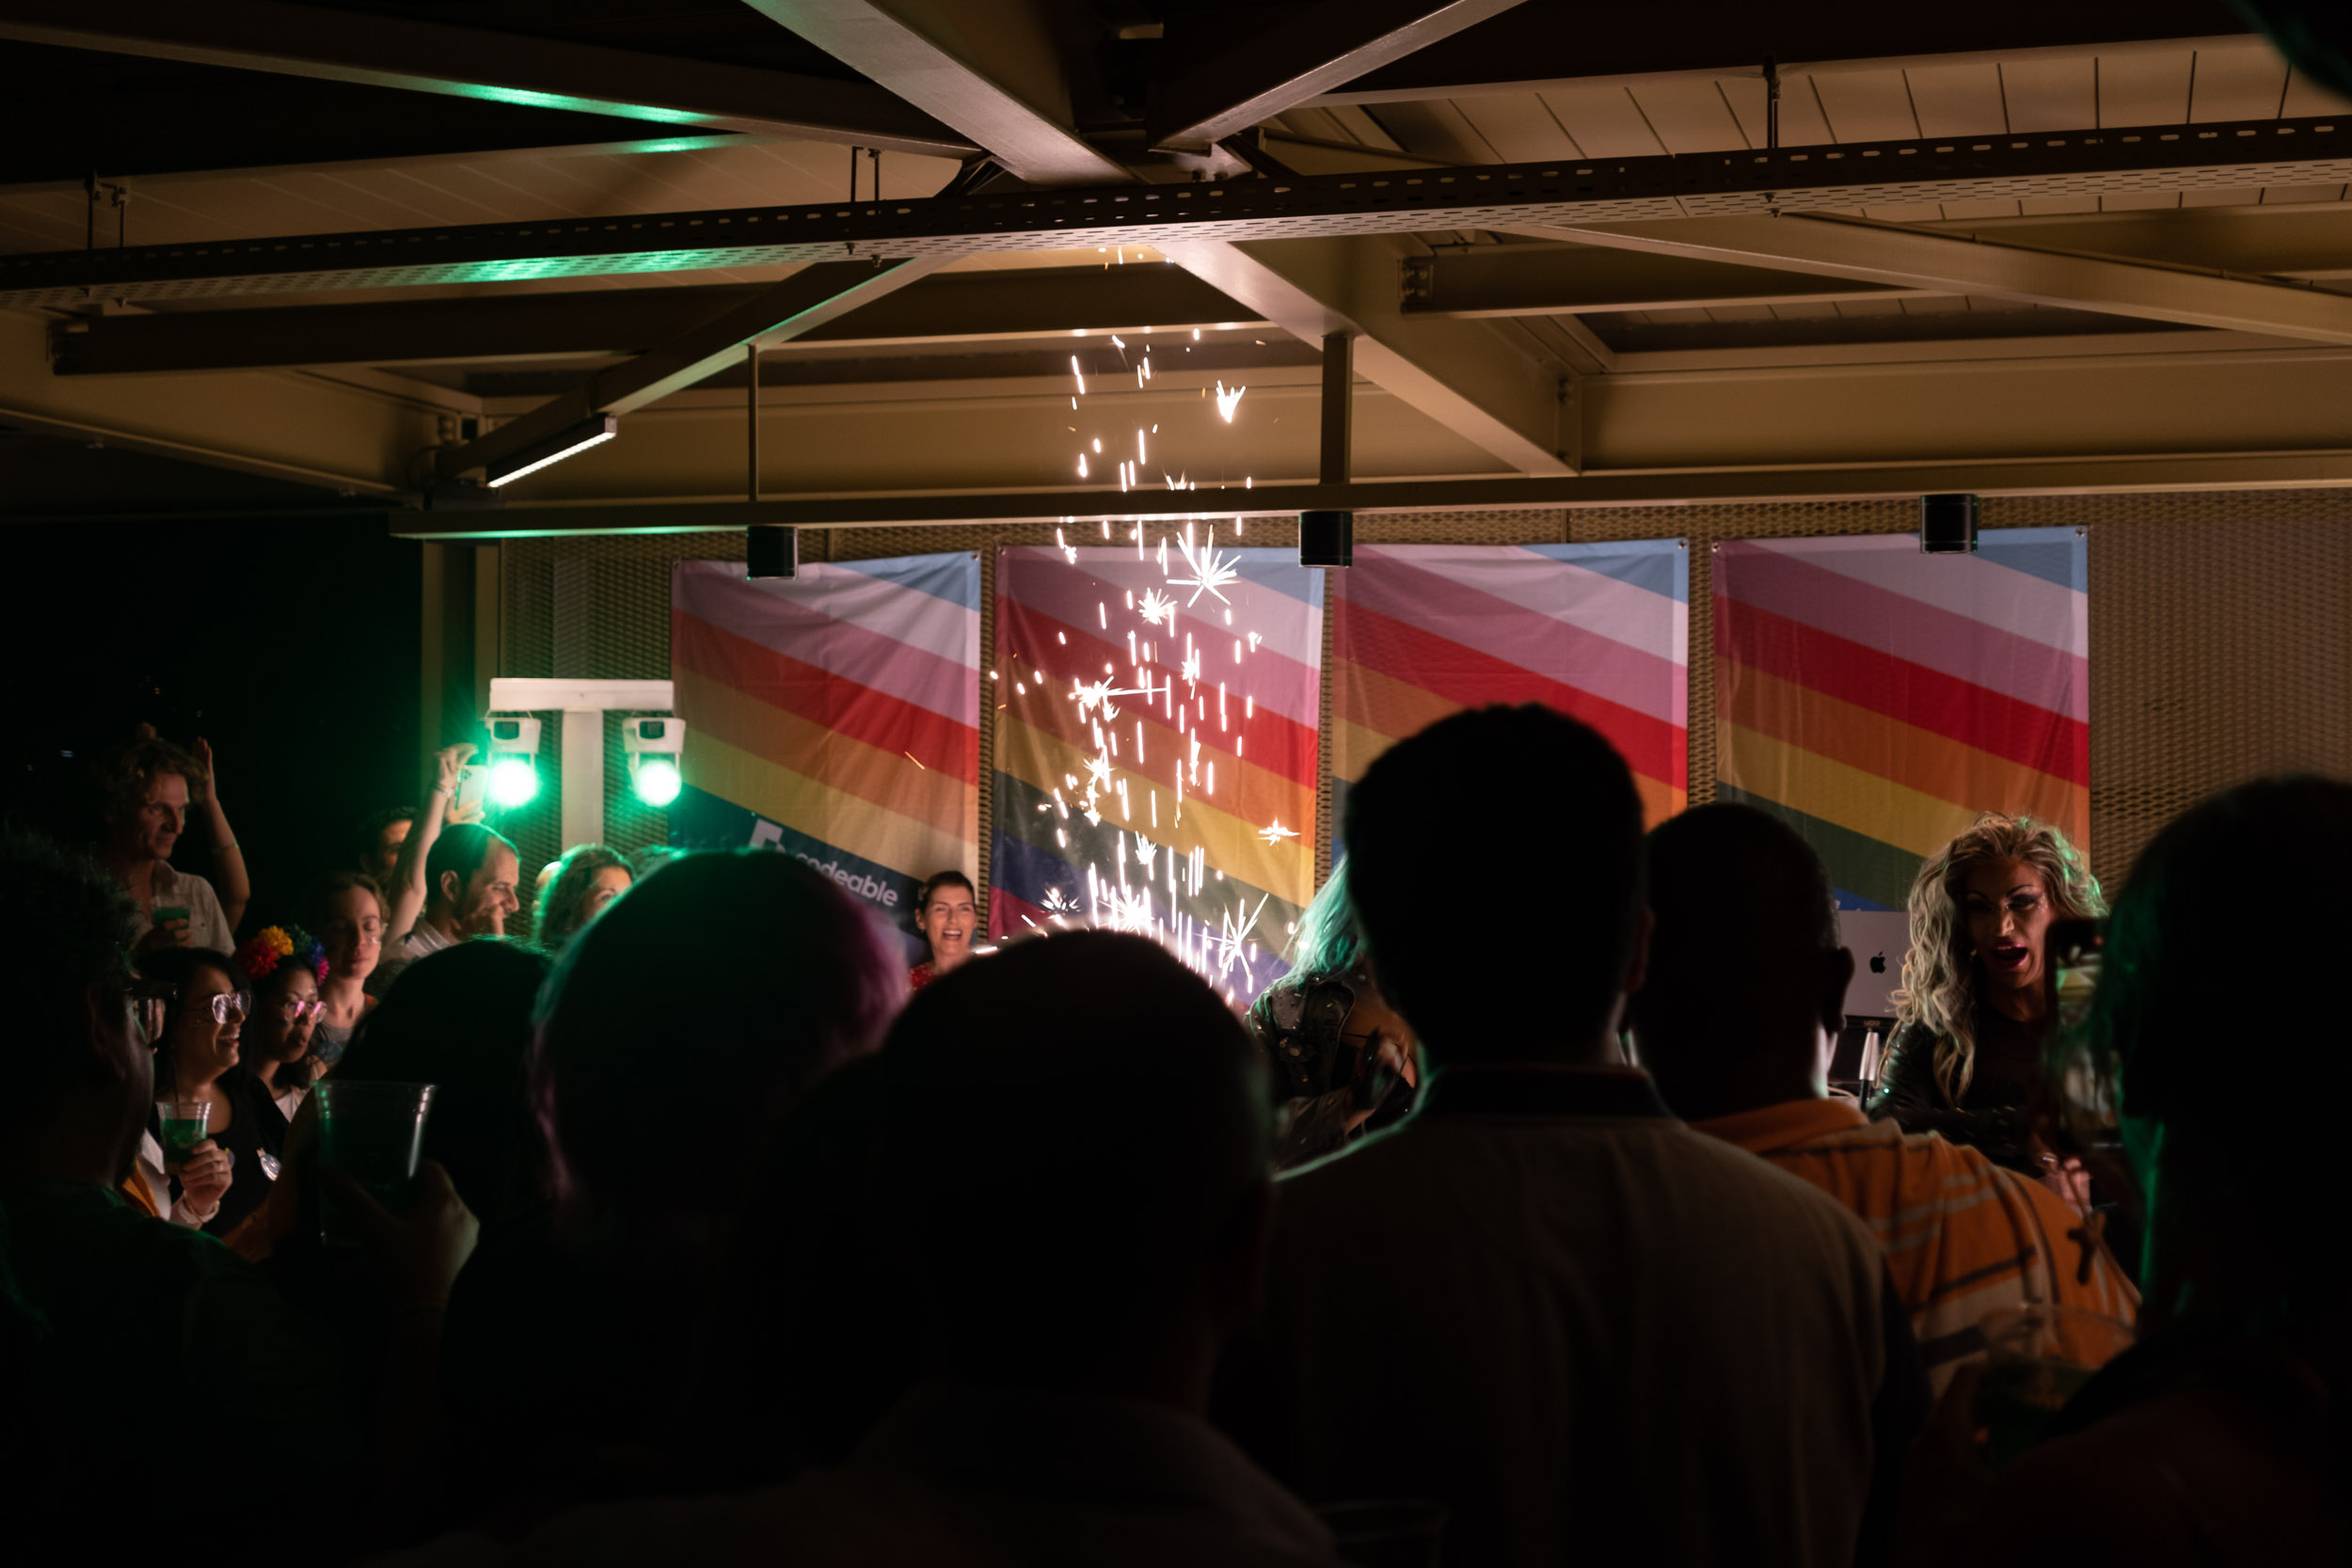 An impression of the drag show at the pride party we attended during WordCamp Europe.